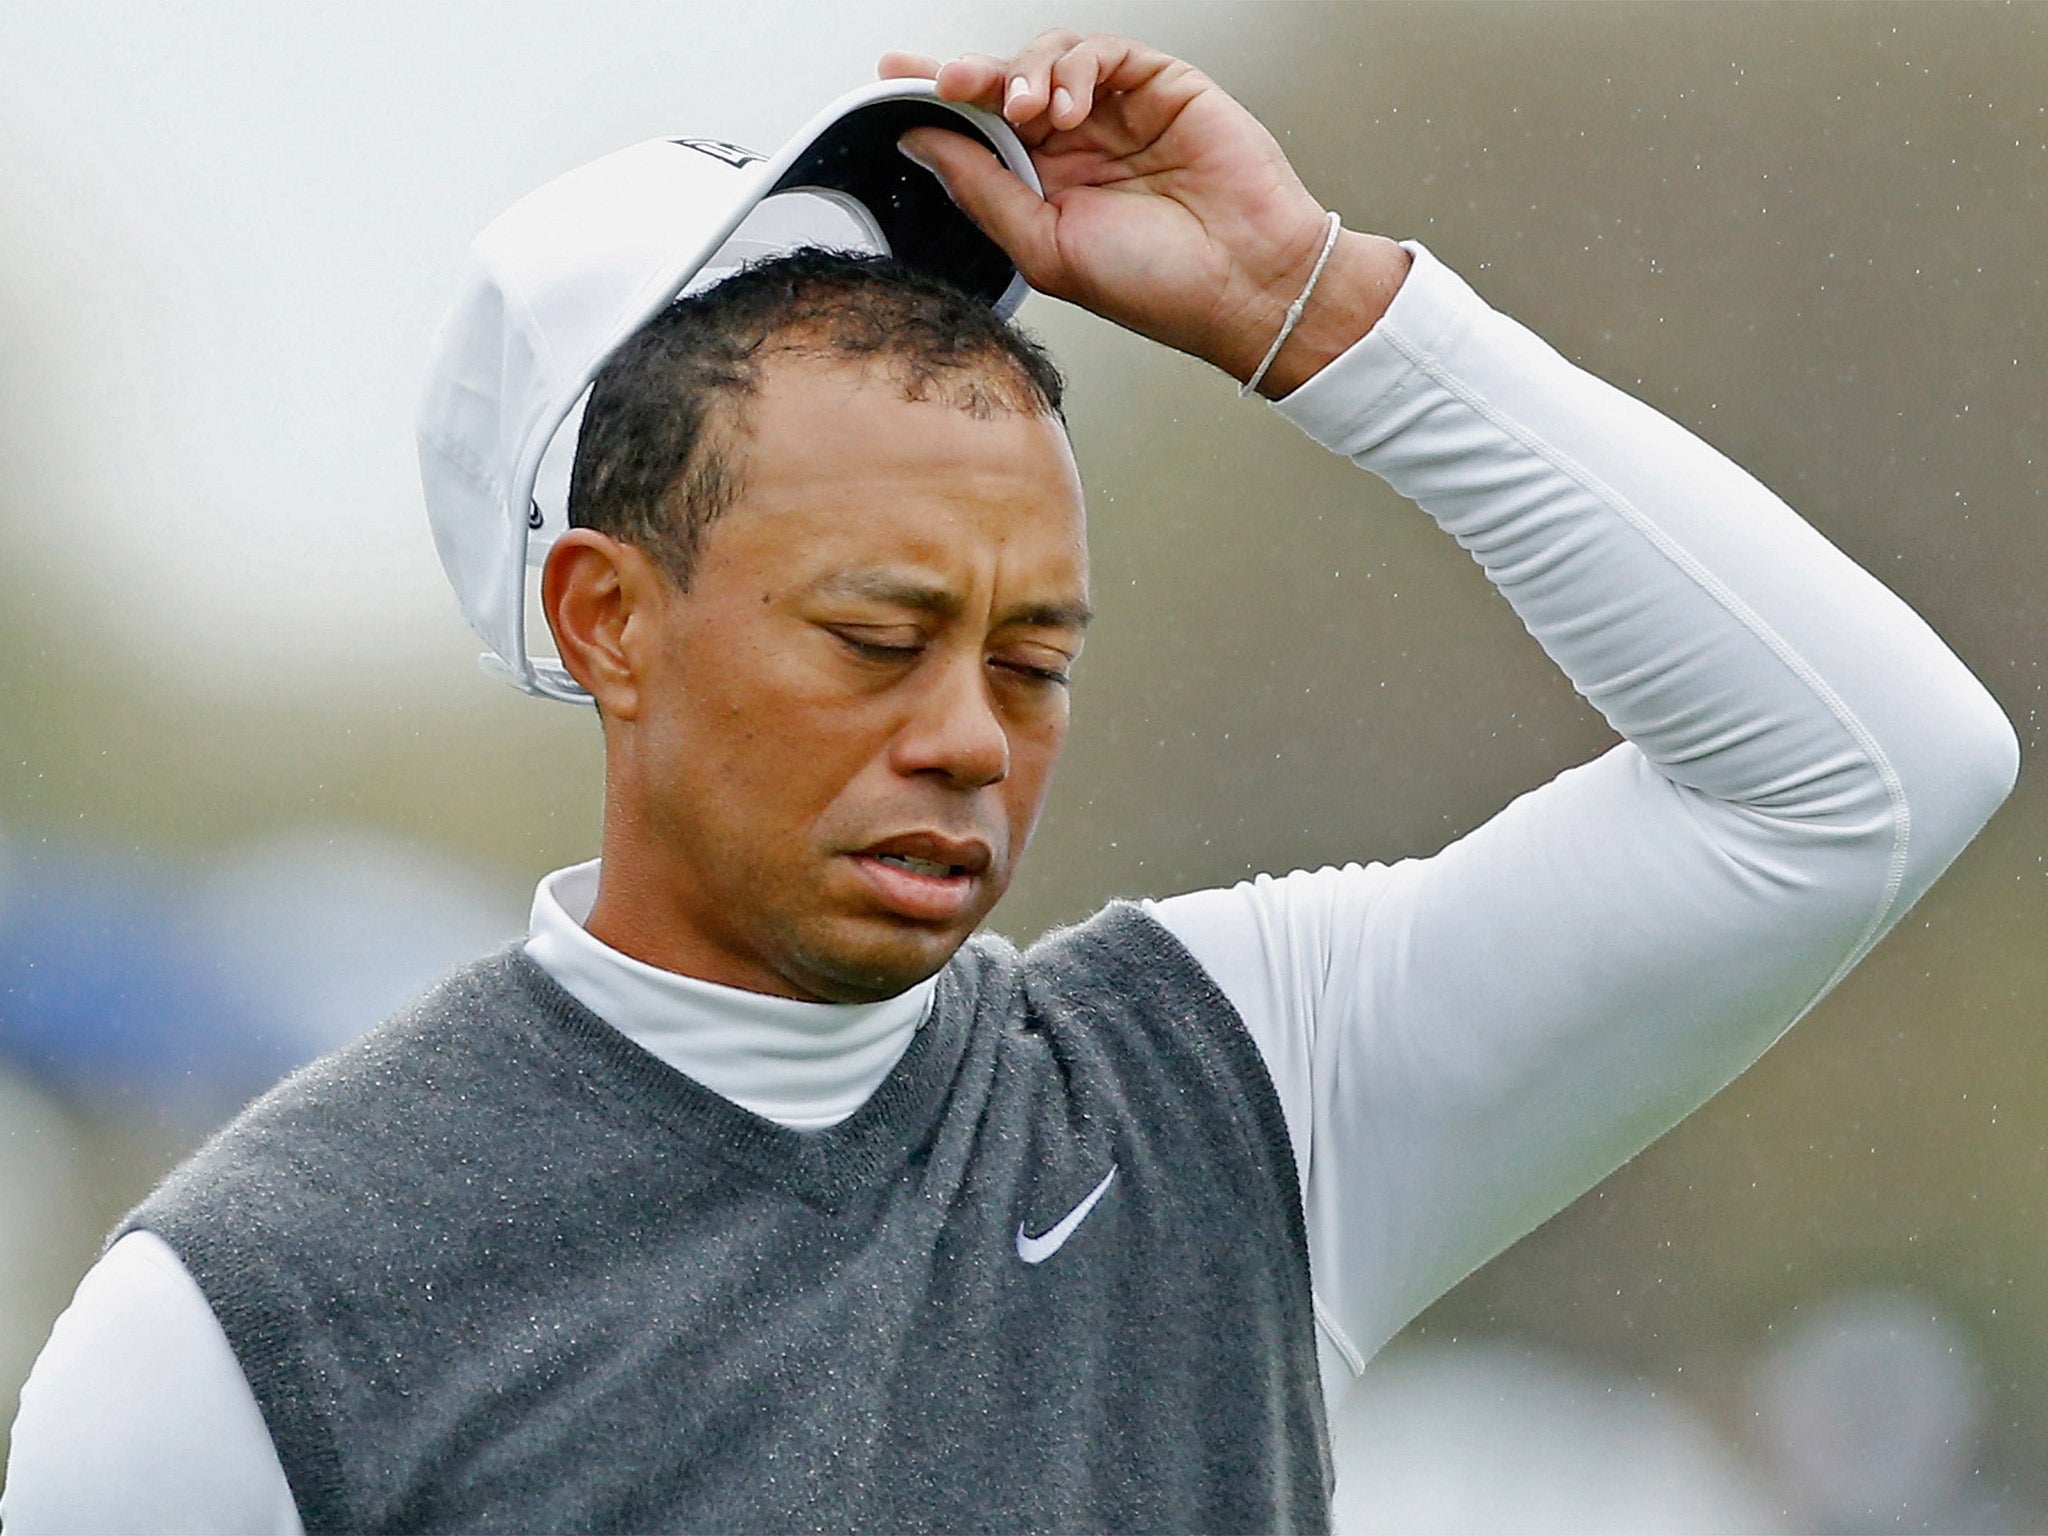 Tiger Woods has slipped out of the world top 50 for only the second time in his career